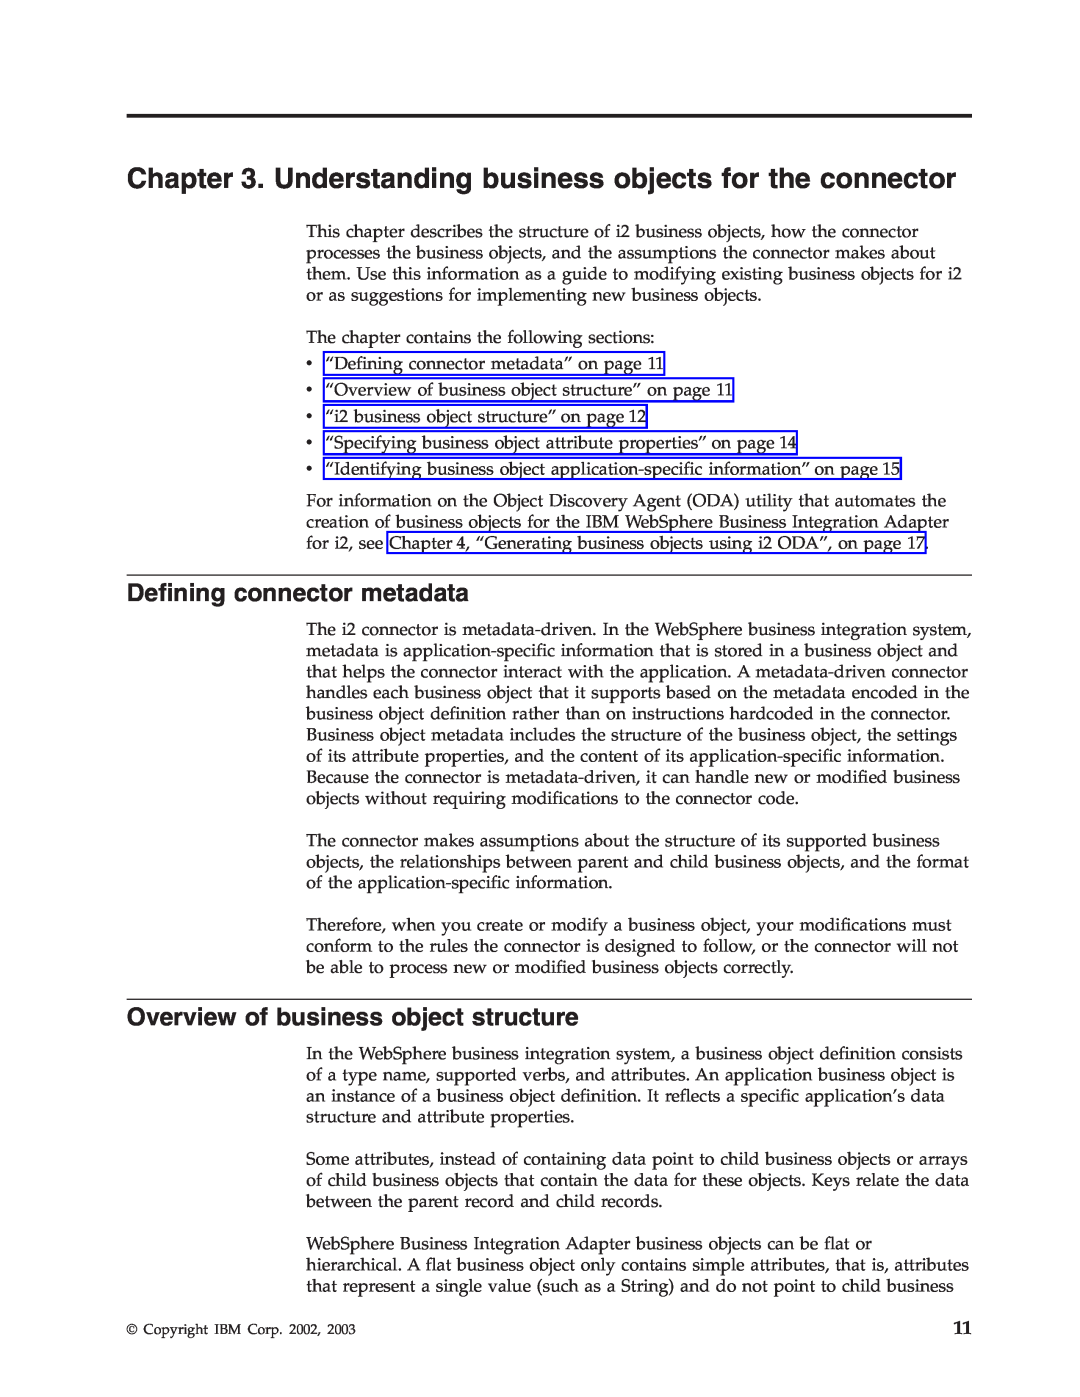 IBM WebSphere Business Integration Adapter Understanding business objects for the connector, Defining connector metadata 